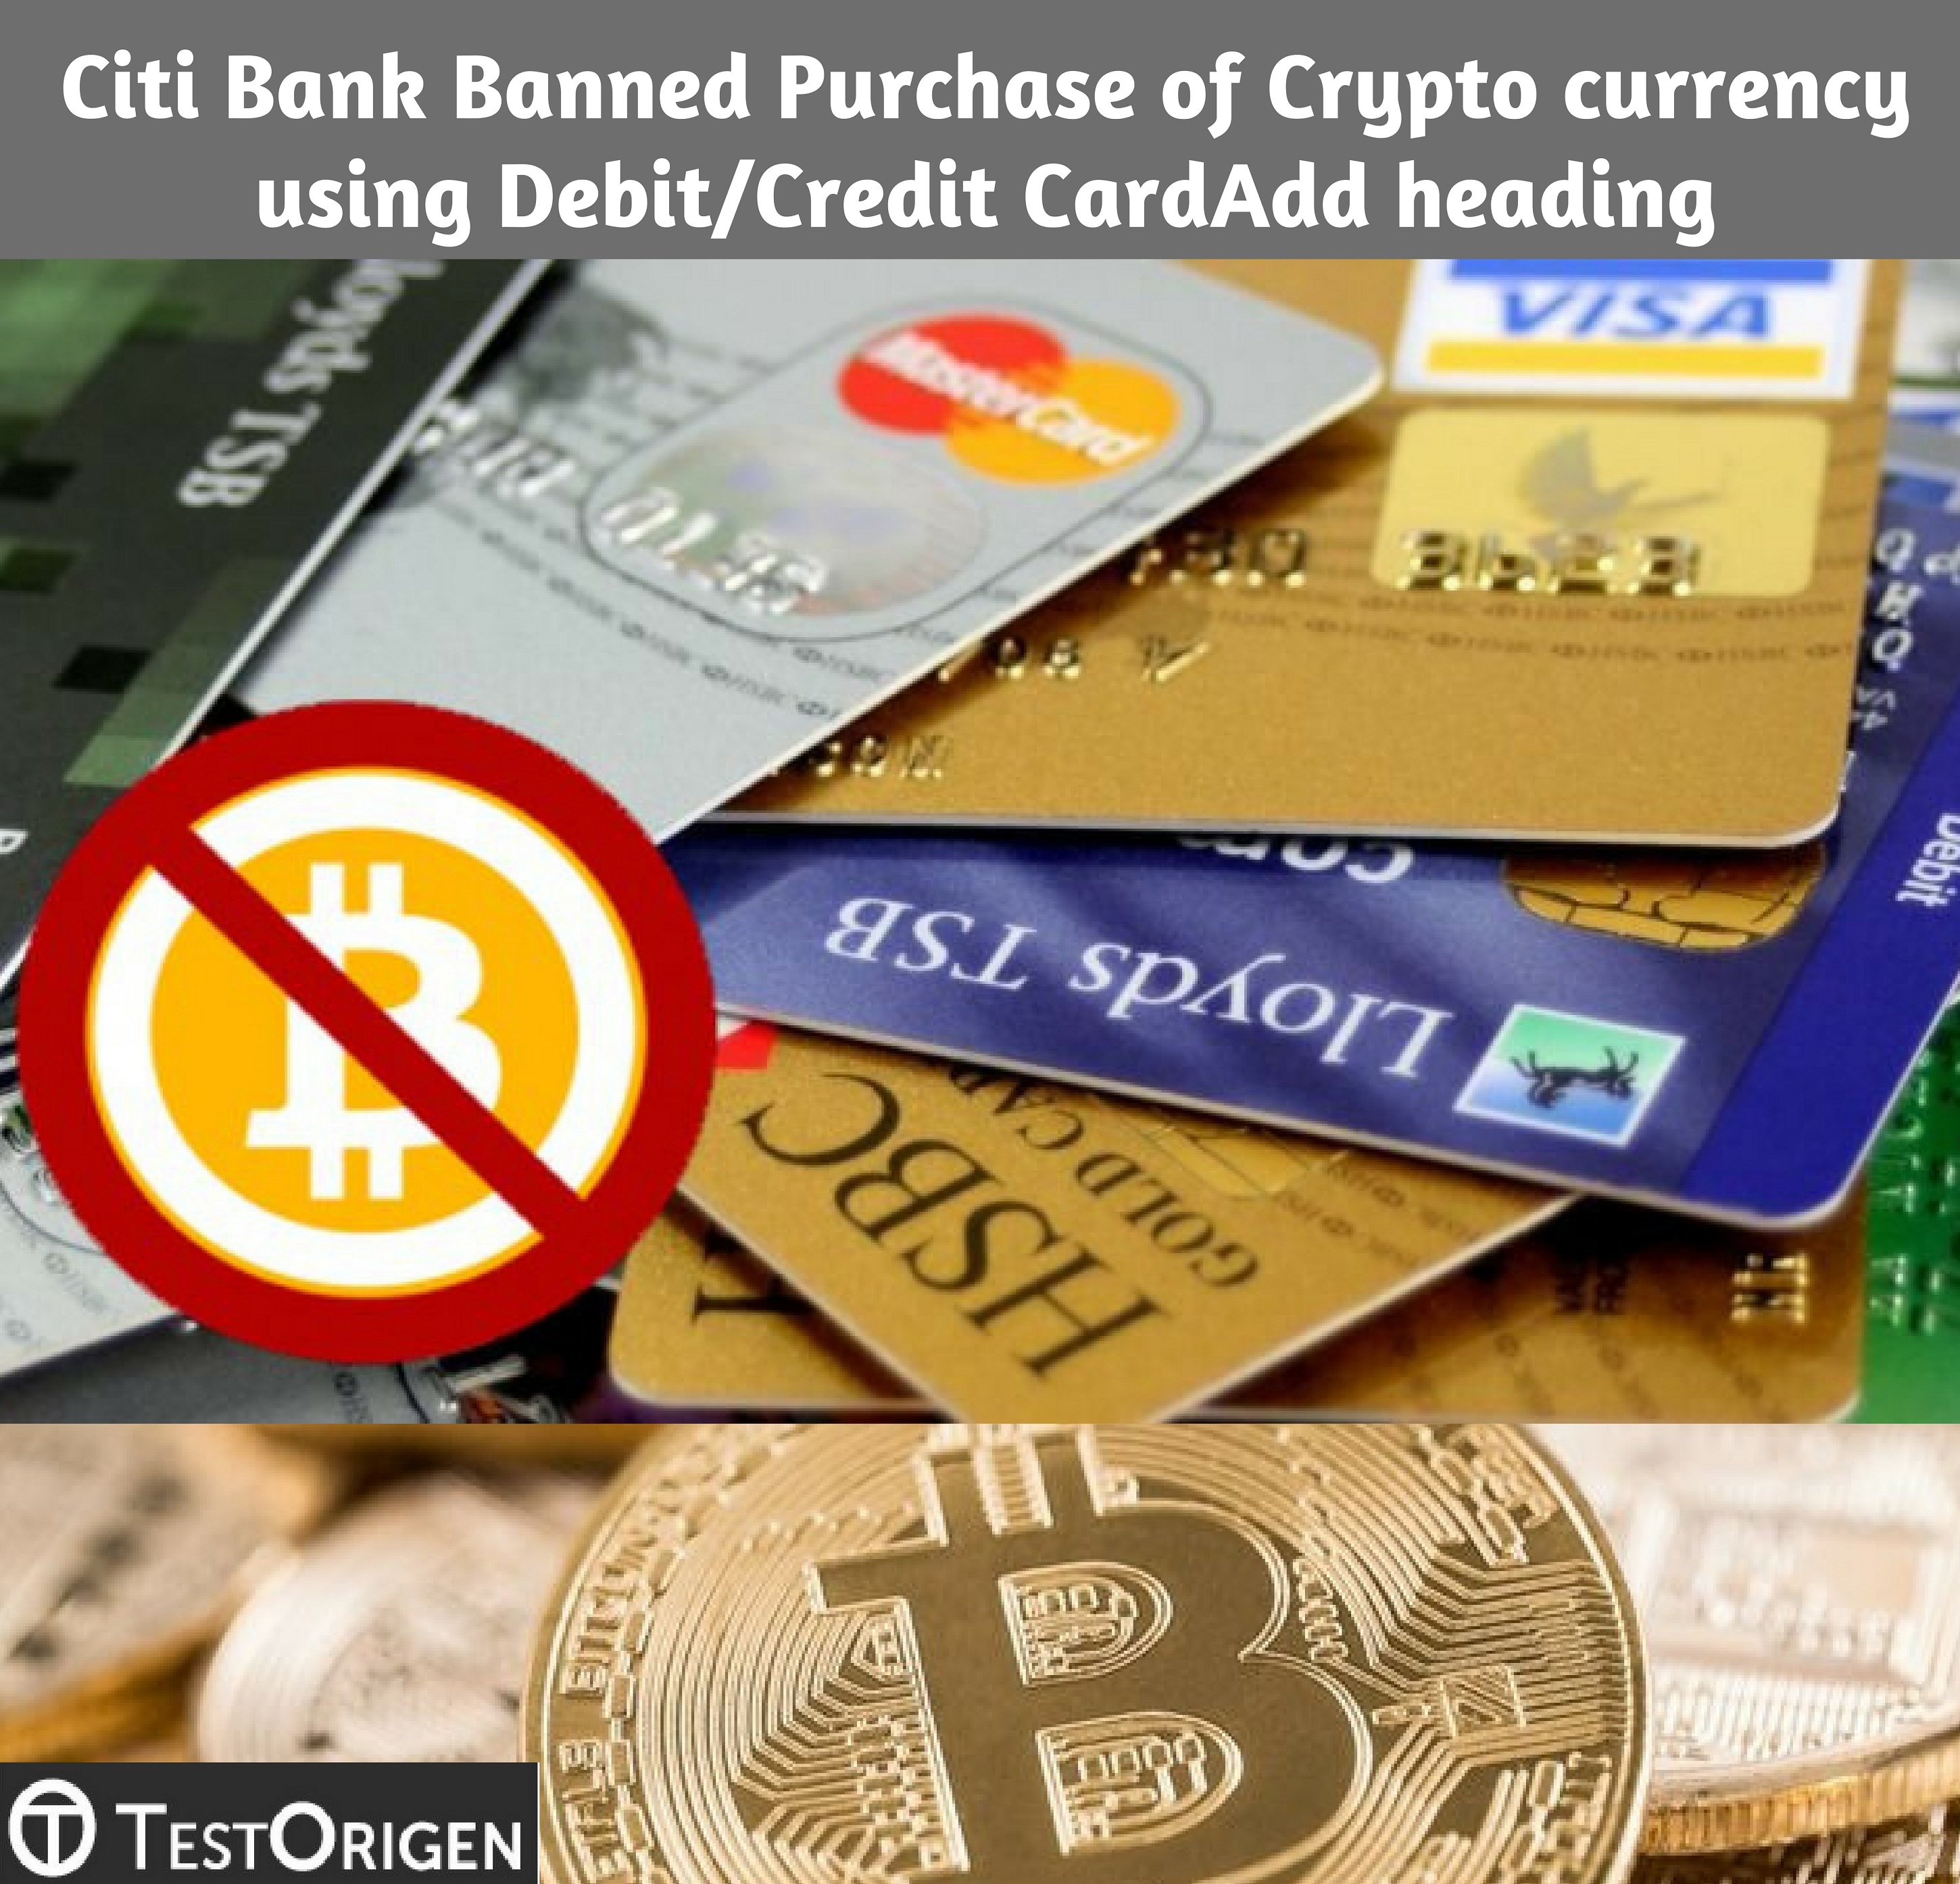 Citi Bank Banned Purchase of Crypto currency using Debit/Credit Card